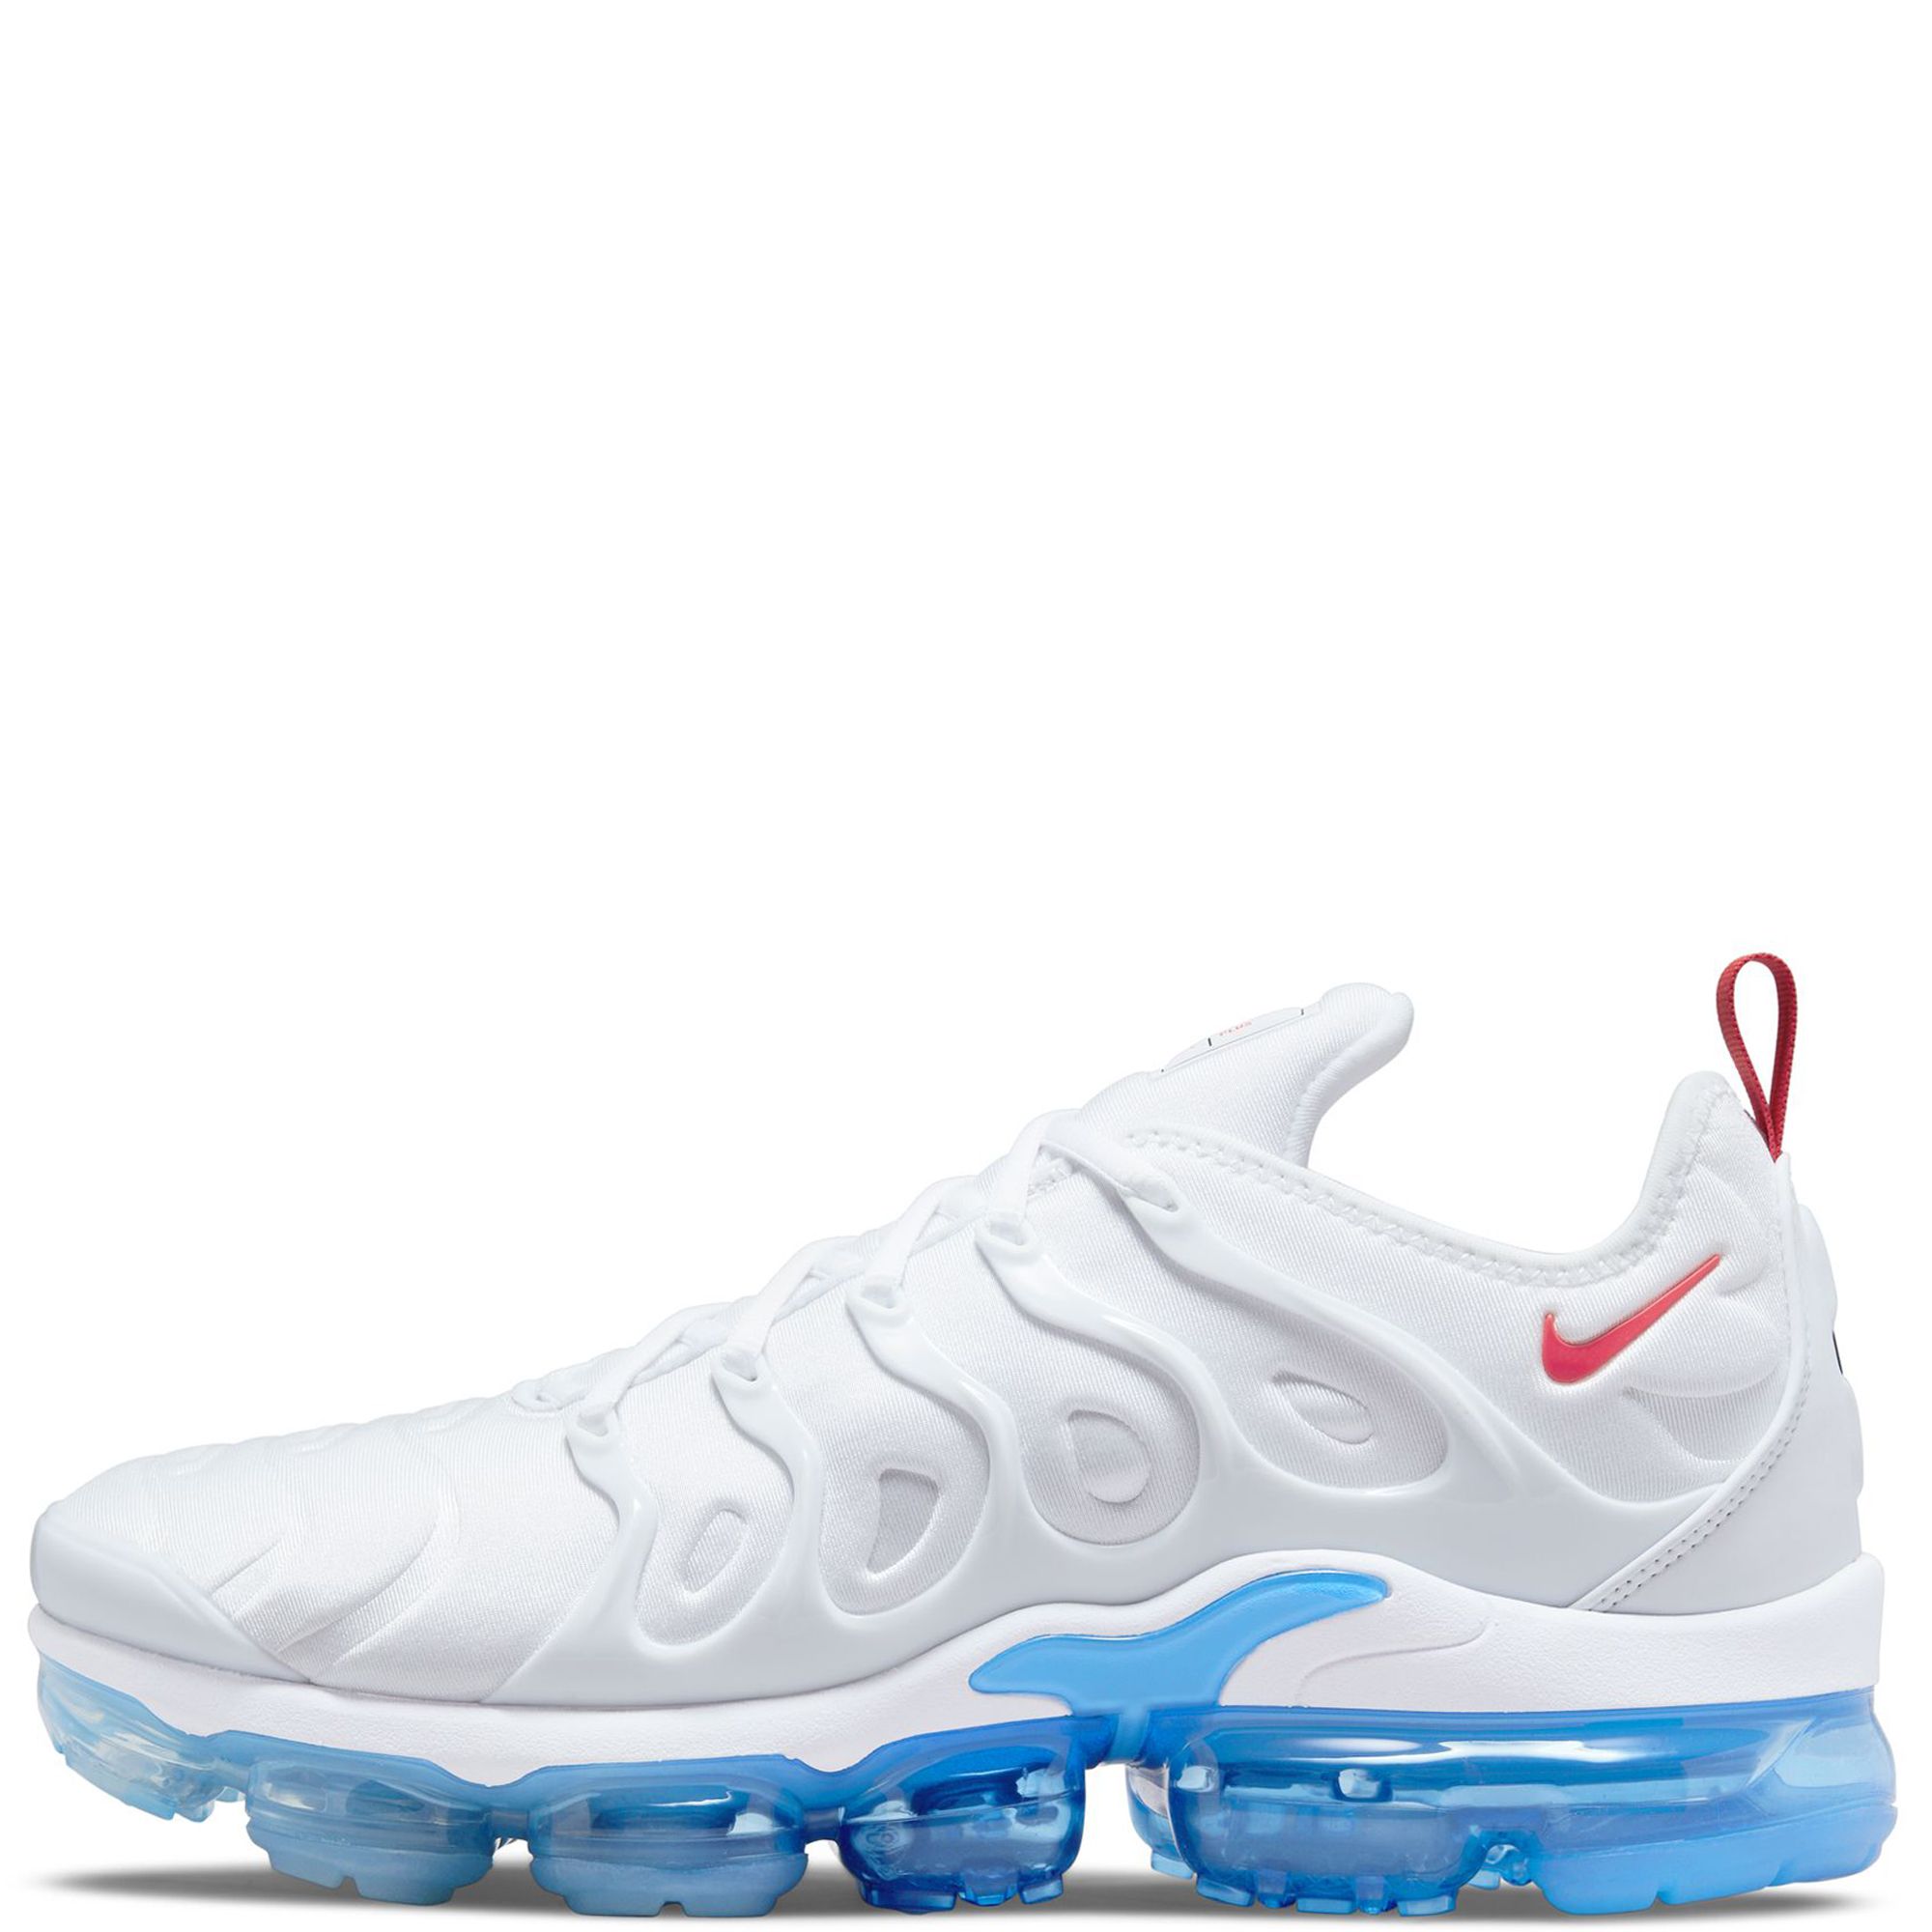 vapormax white red blue